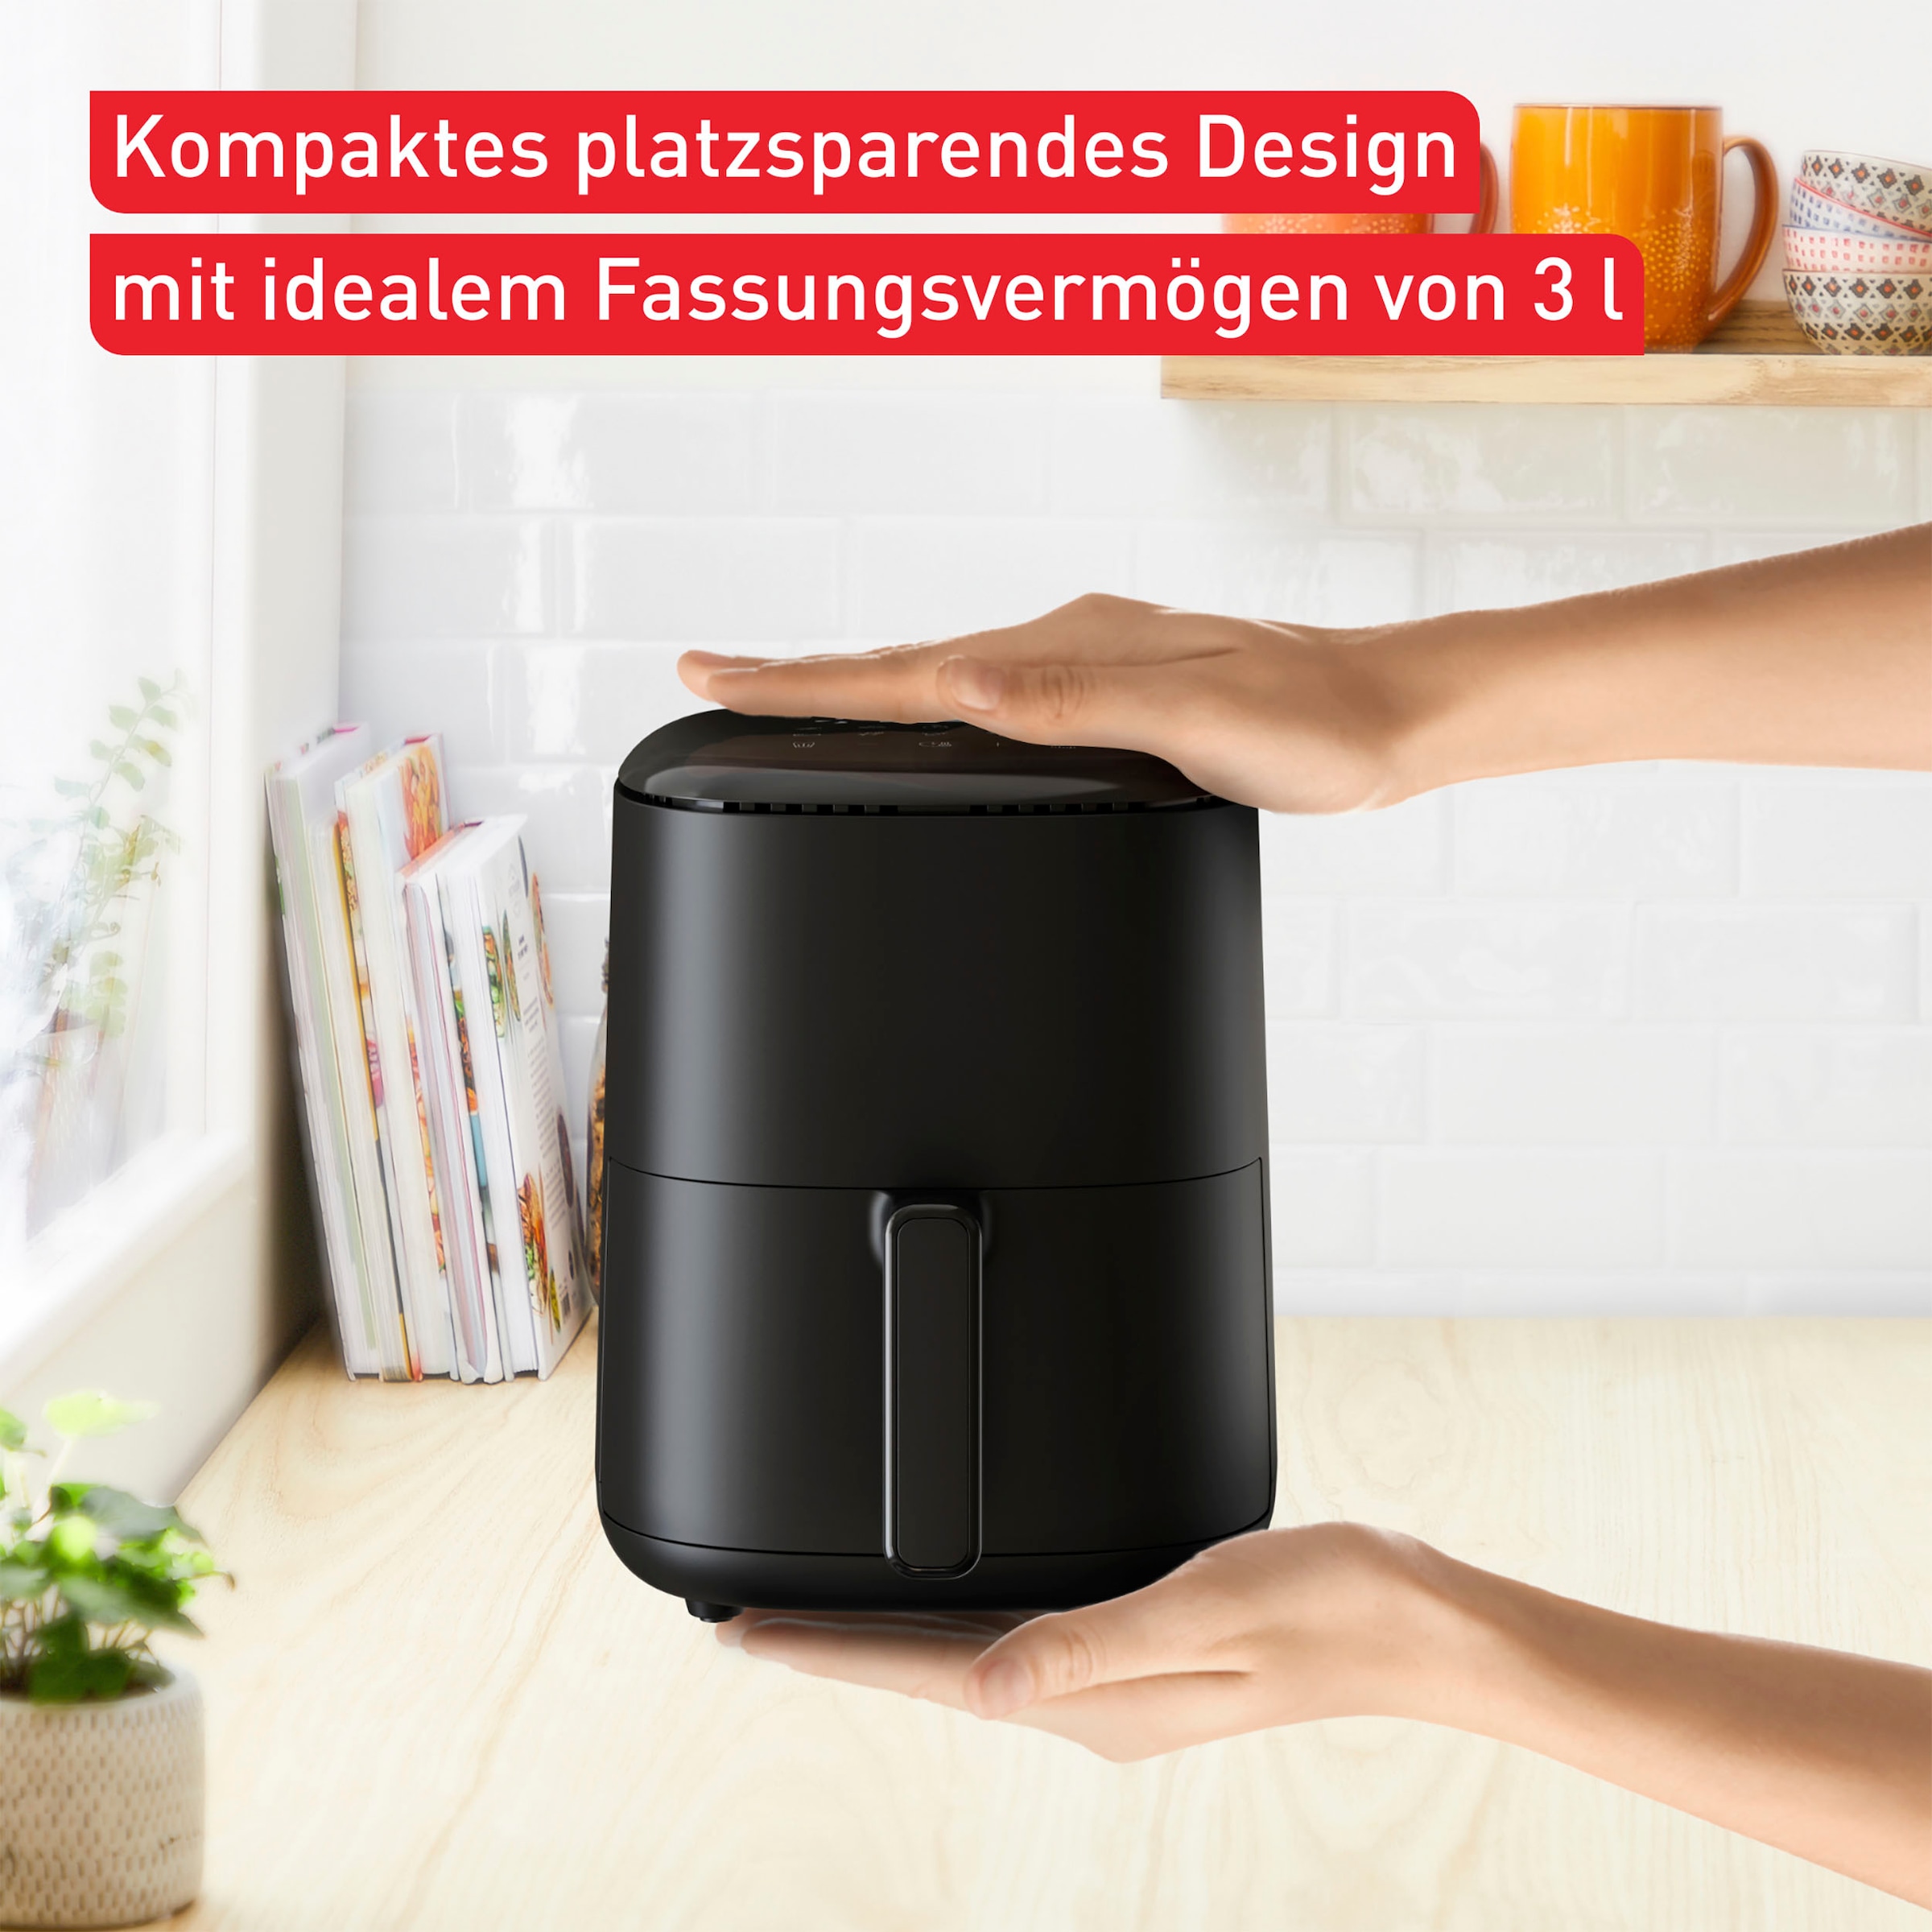 Tefal Heißluftfritteuse Easy Fry im Online »EY1458 1300 W OTTO Compact«, Shop